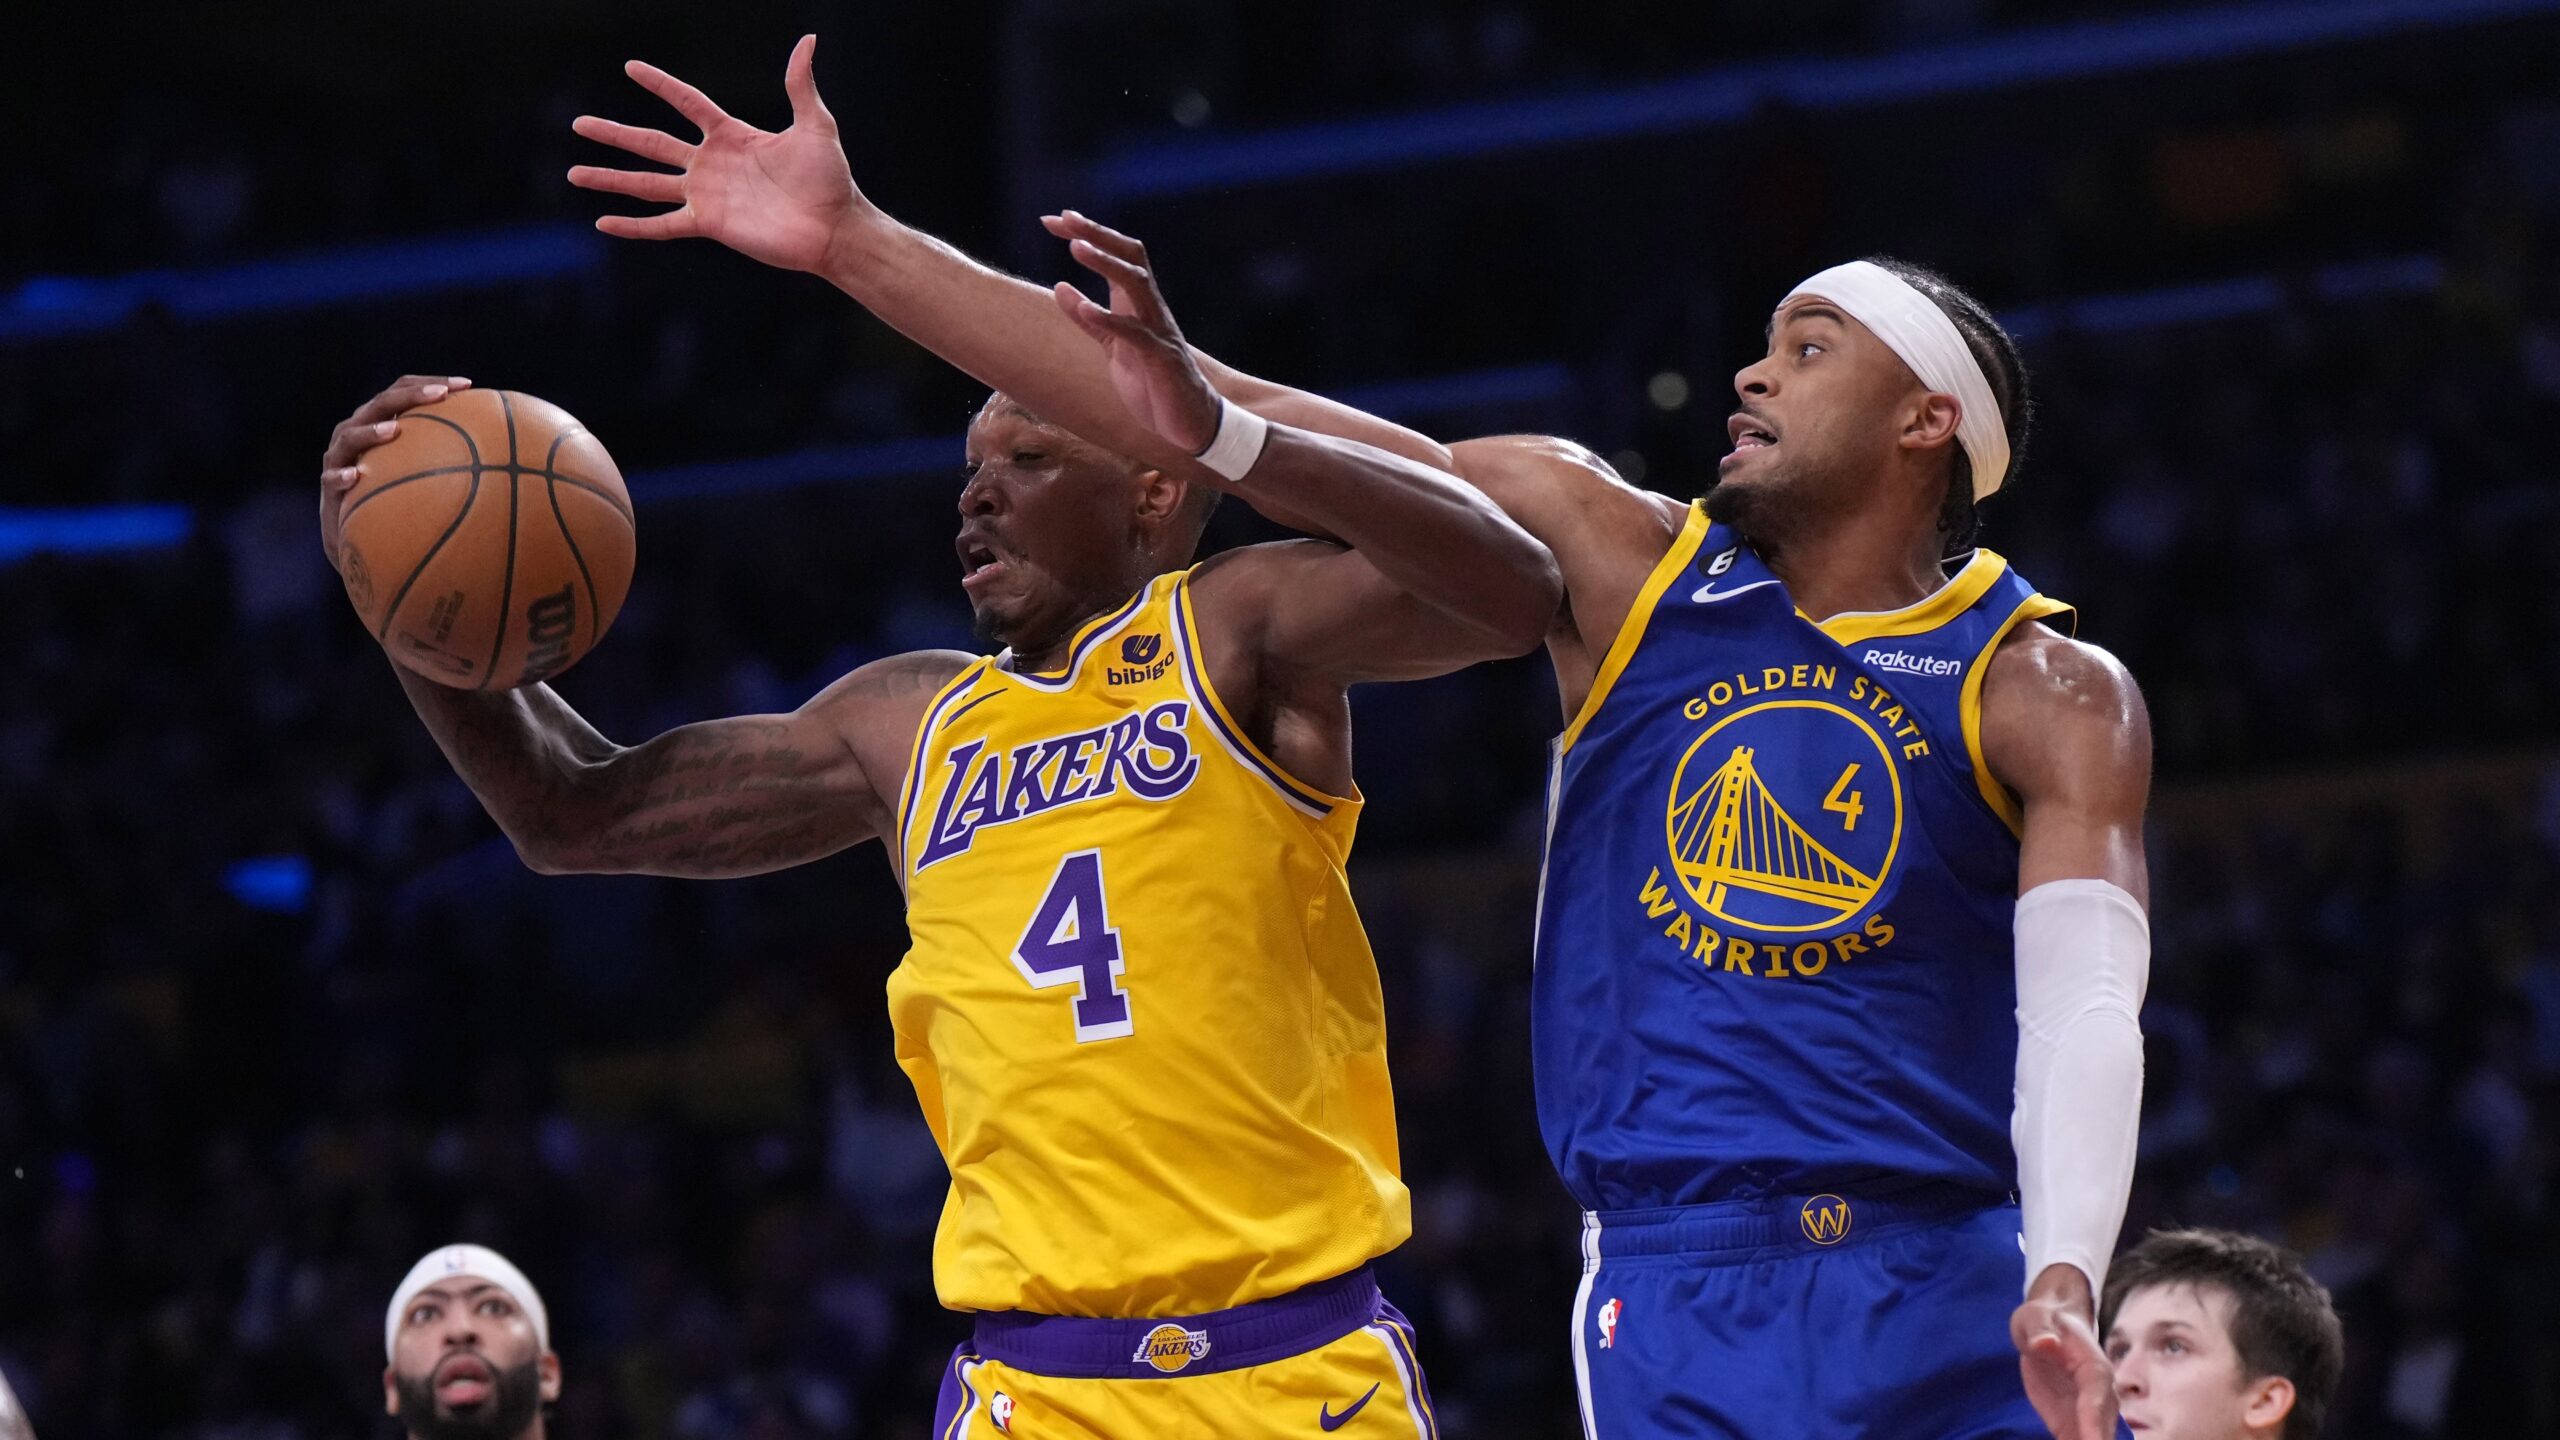 Lakers Ride Lonnie Walker's Memorable 4th Quarter to Game 4 Win